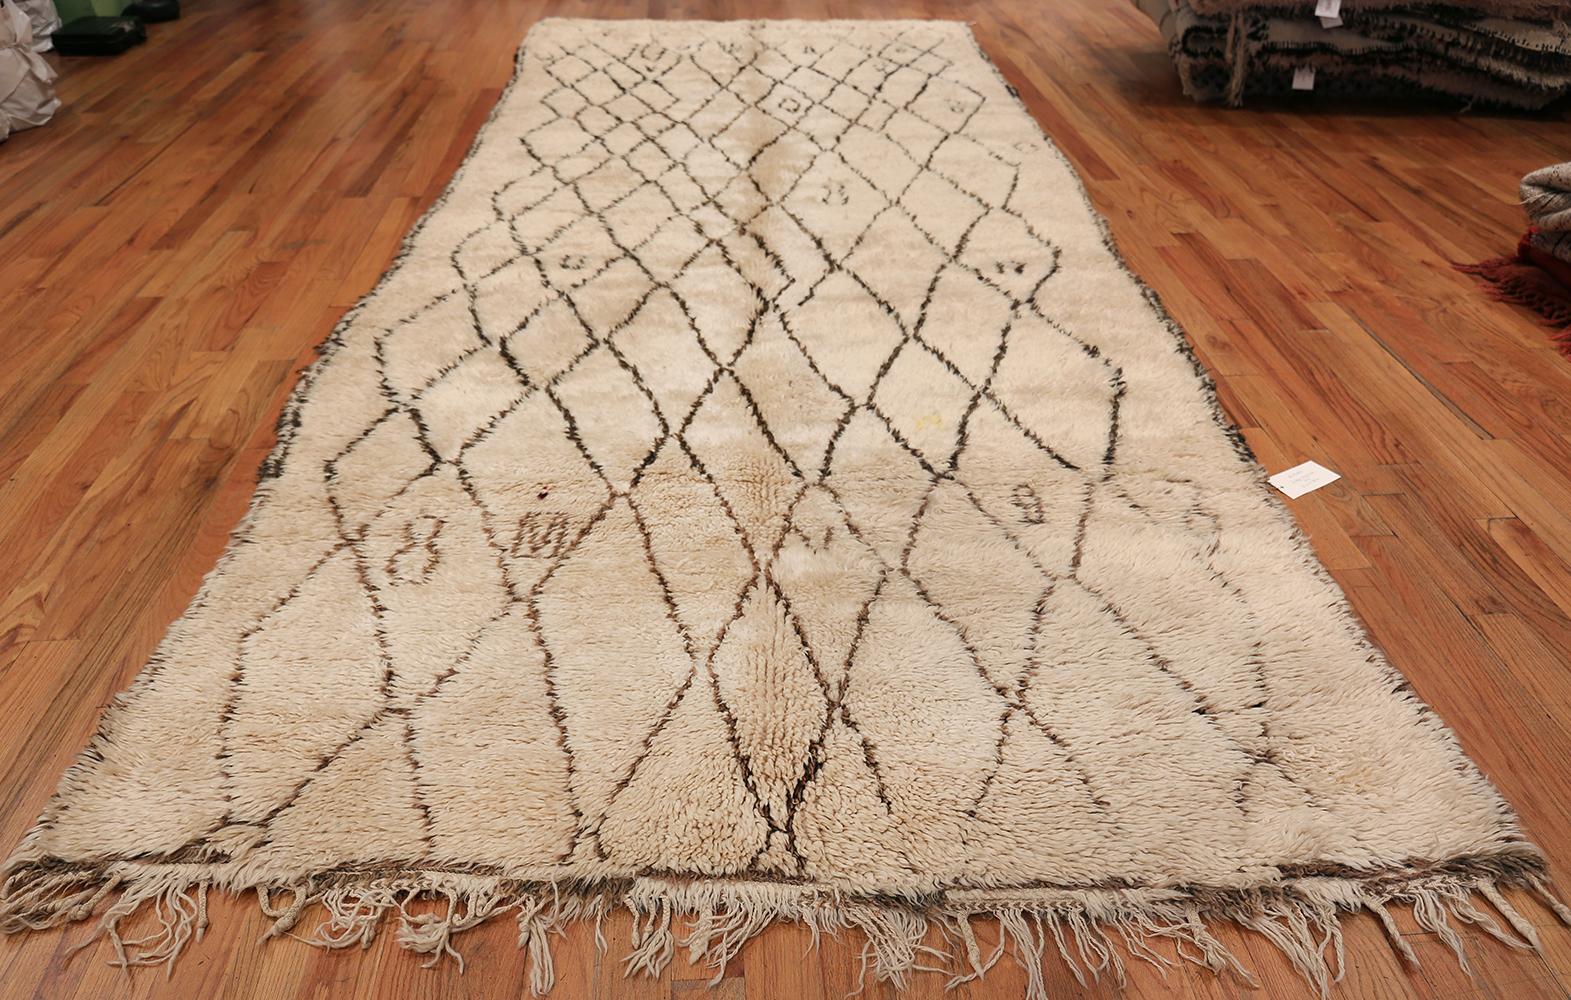 Magnificent Ivory Background Color Gallery Size Vintage Moroccan Beni Ourain Rug , Country of Origin / Rug Type: Morocco, Circa Date: Mid – 20th Century. Size: 6 ft 2 in x 15 ft (1.88 m x 4.57 m)

Vintage mid-century Moroccan rugs are an excellent